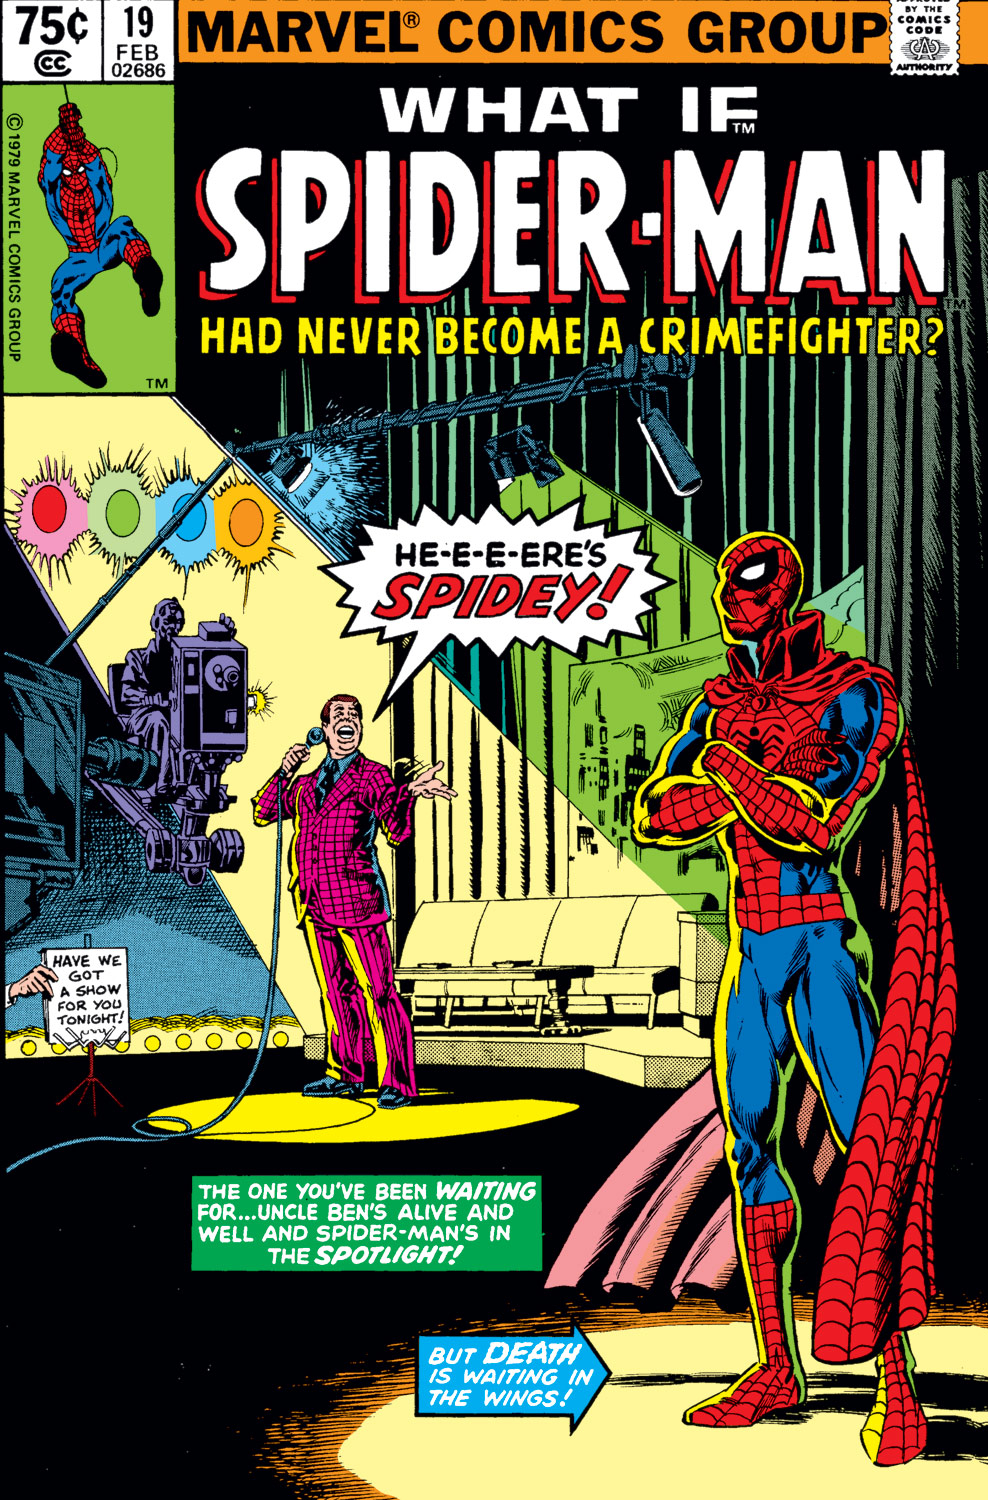 <{ $series->title }} issue 19 - Spider-Man had never become a crimefighter - Page 1